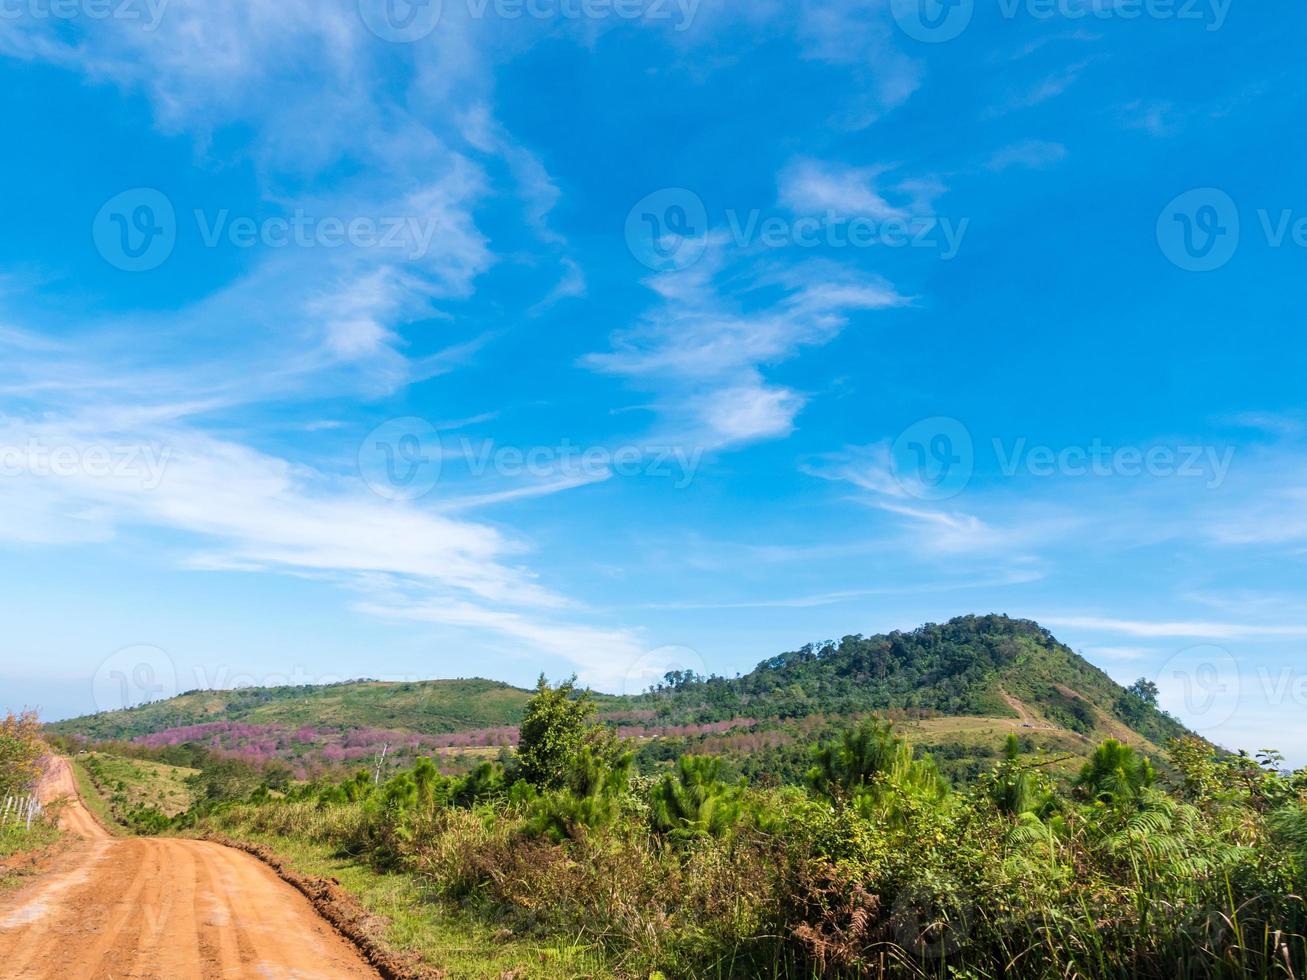 Beautiful landscape with country road, mountains and blue sky. Travel concept photo